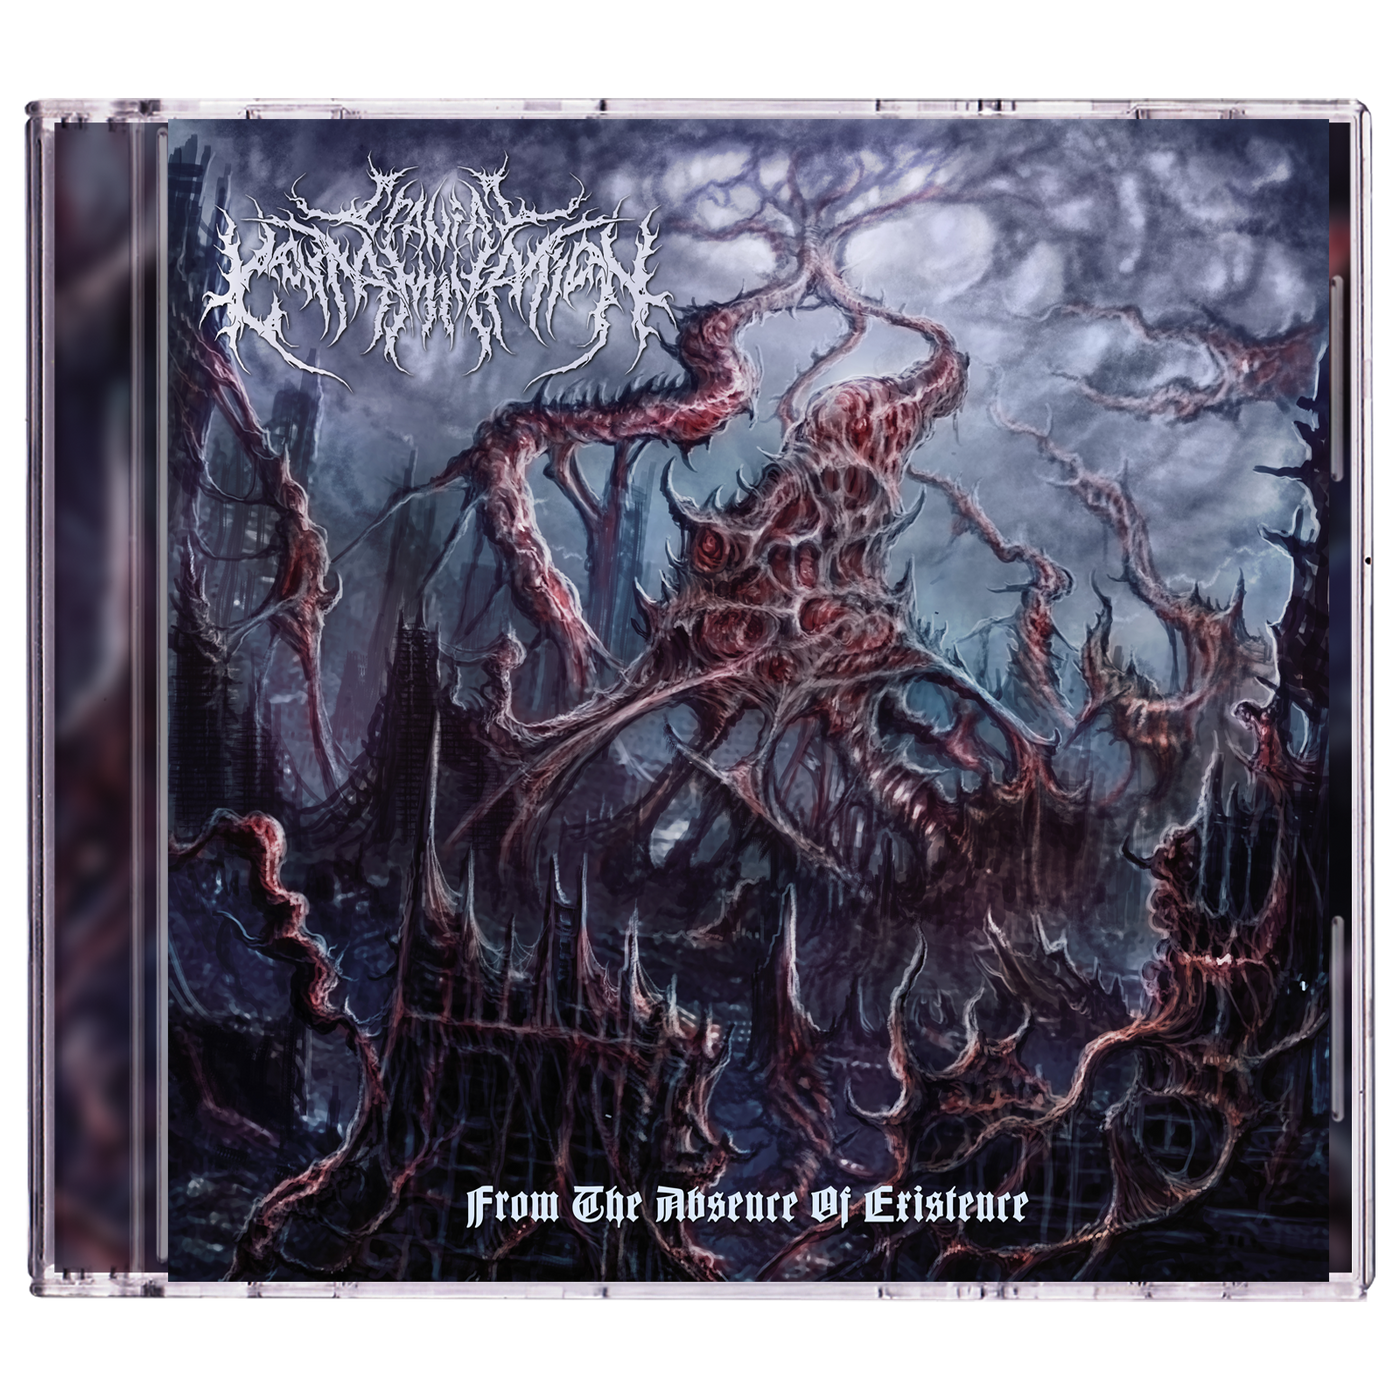 Cranial Contamination 'From The Absence Of Existence' CD